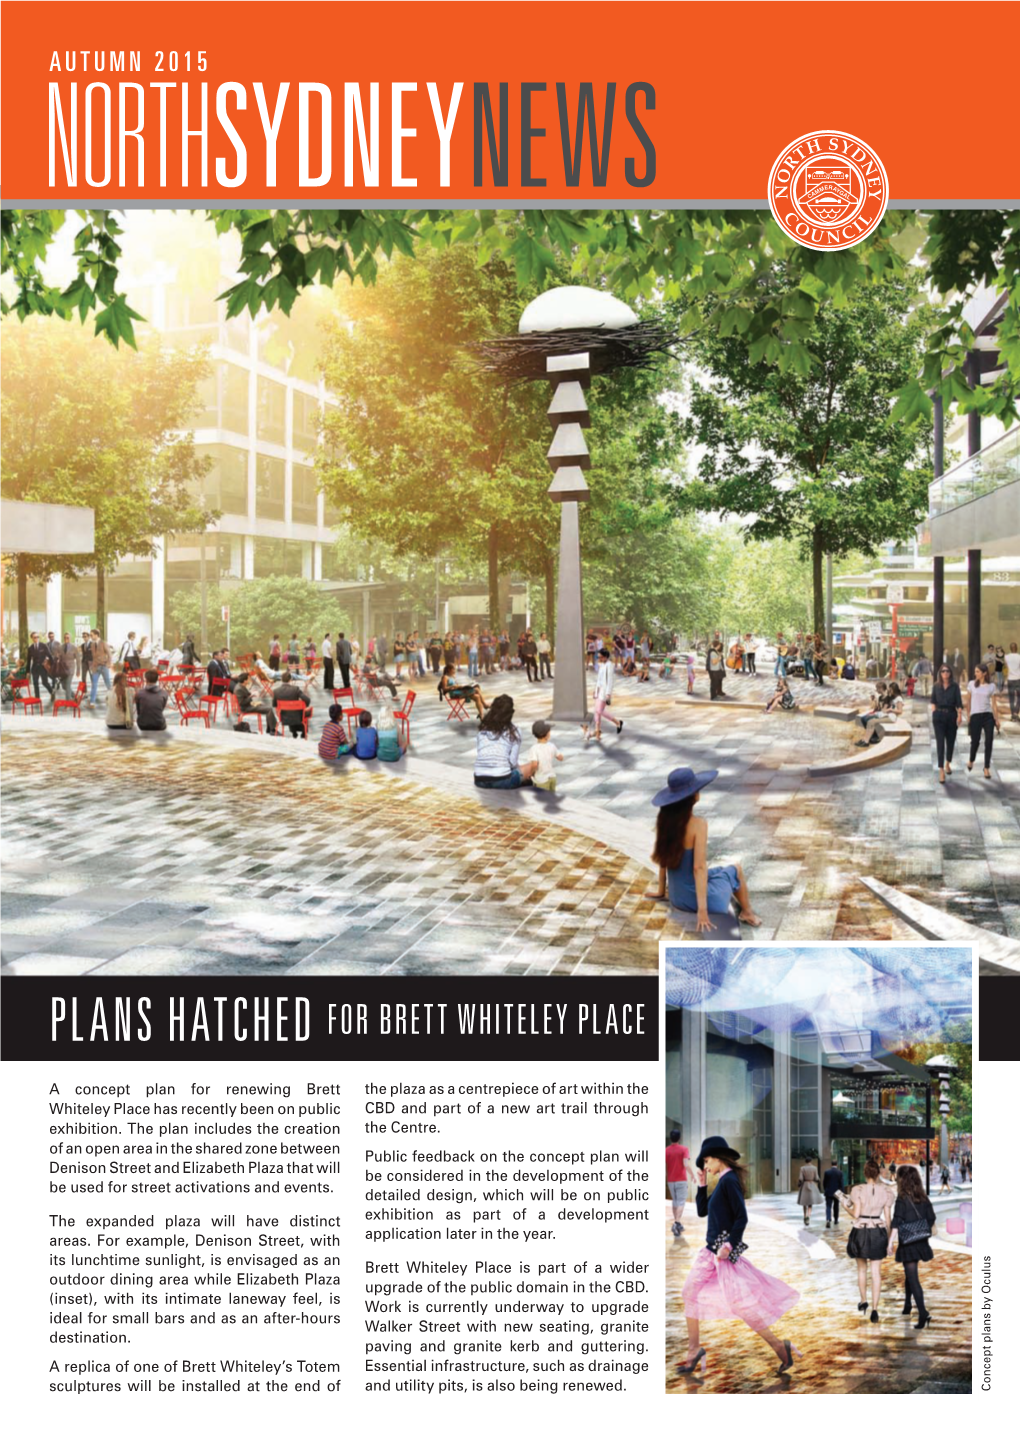 Plans Hatched for Brett Whiteley Place